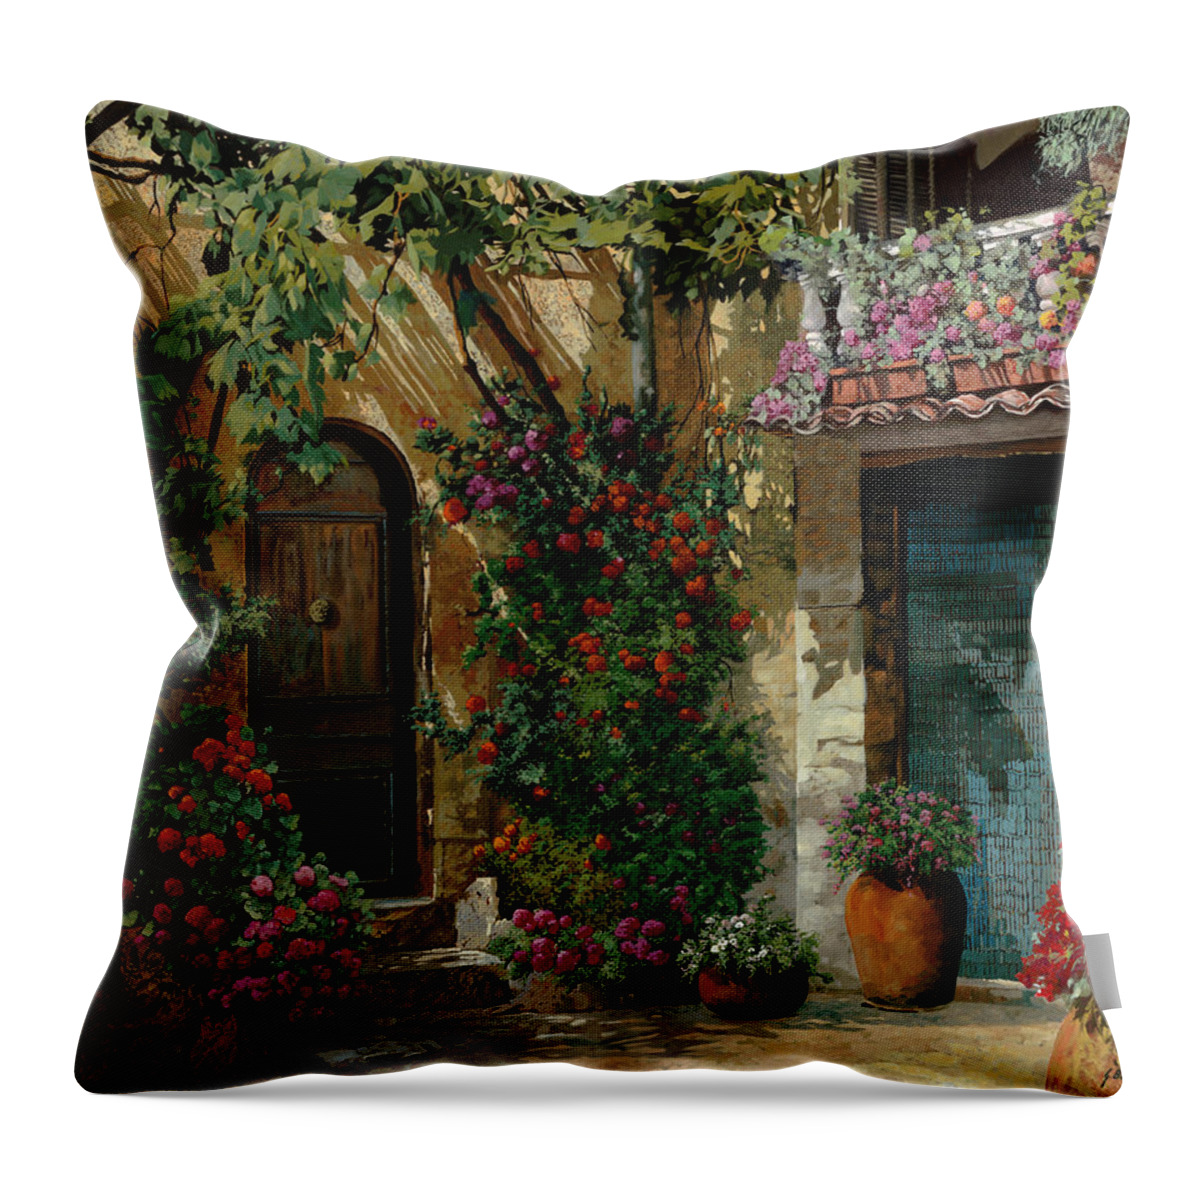 Landscape Throw Pillow featuring the painting Fiori In Cortile by Guido Borelli